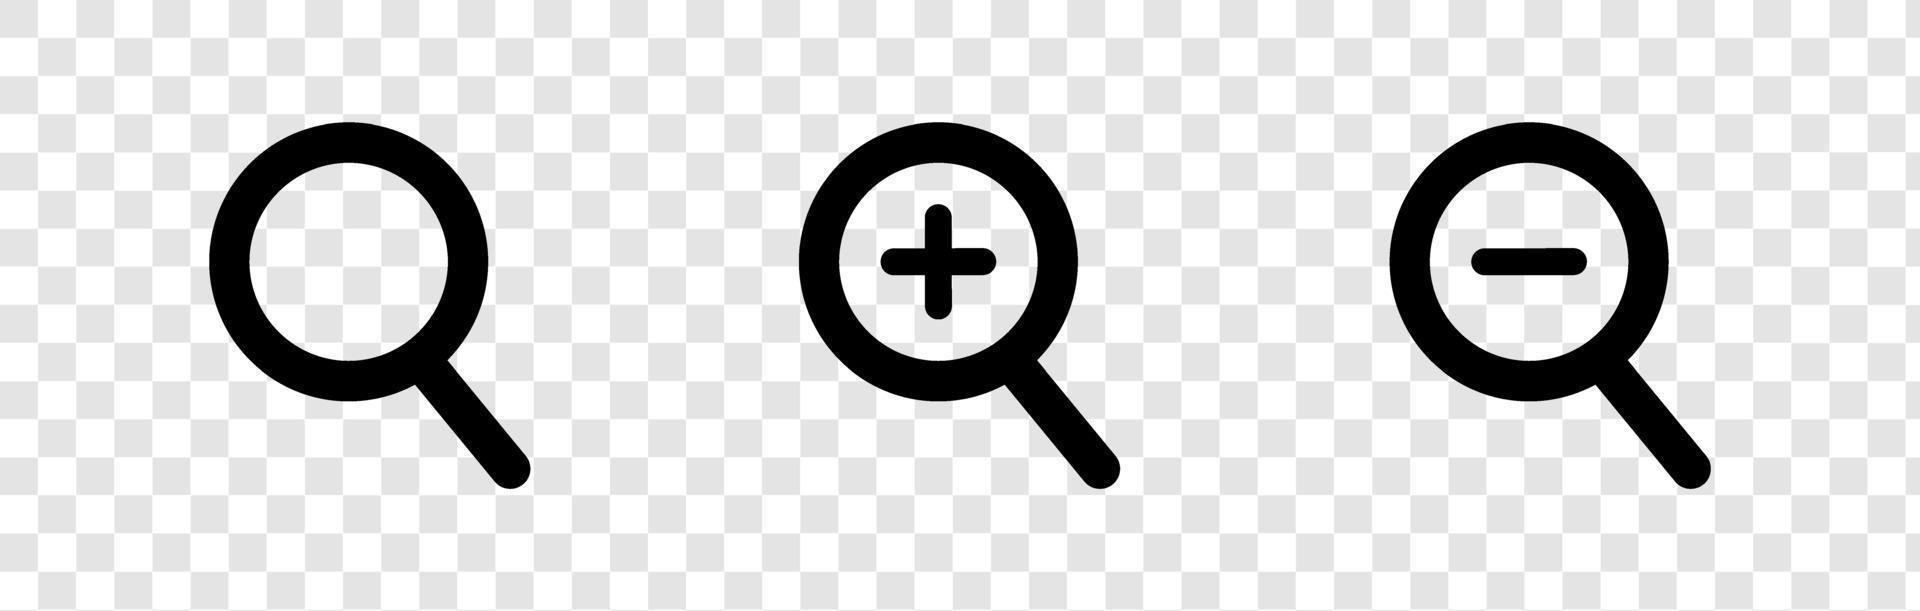 Search Line and Zoom in Icons. Magnifying Glass with Plus and Minus Icon For Mobile and Web Isolated on Transparent Background. vector